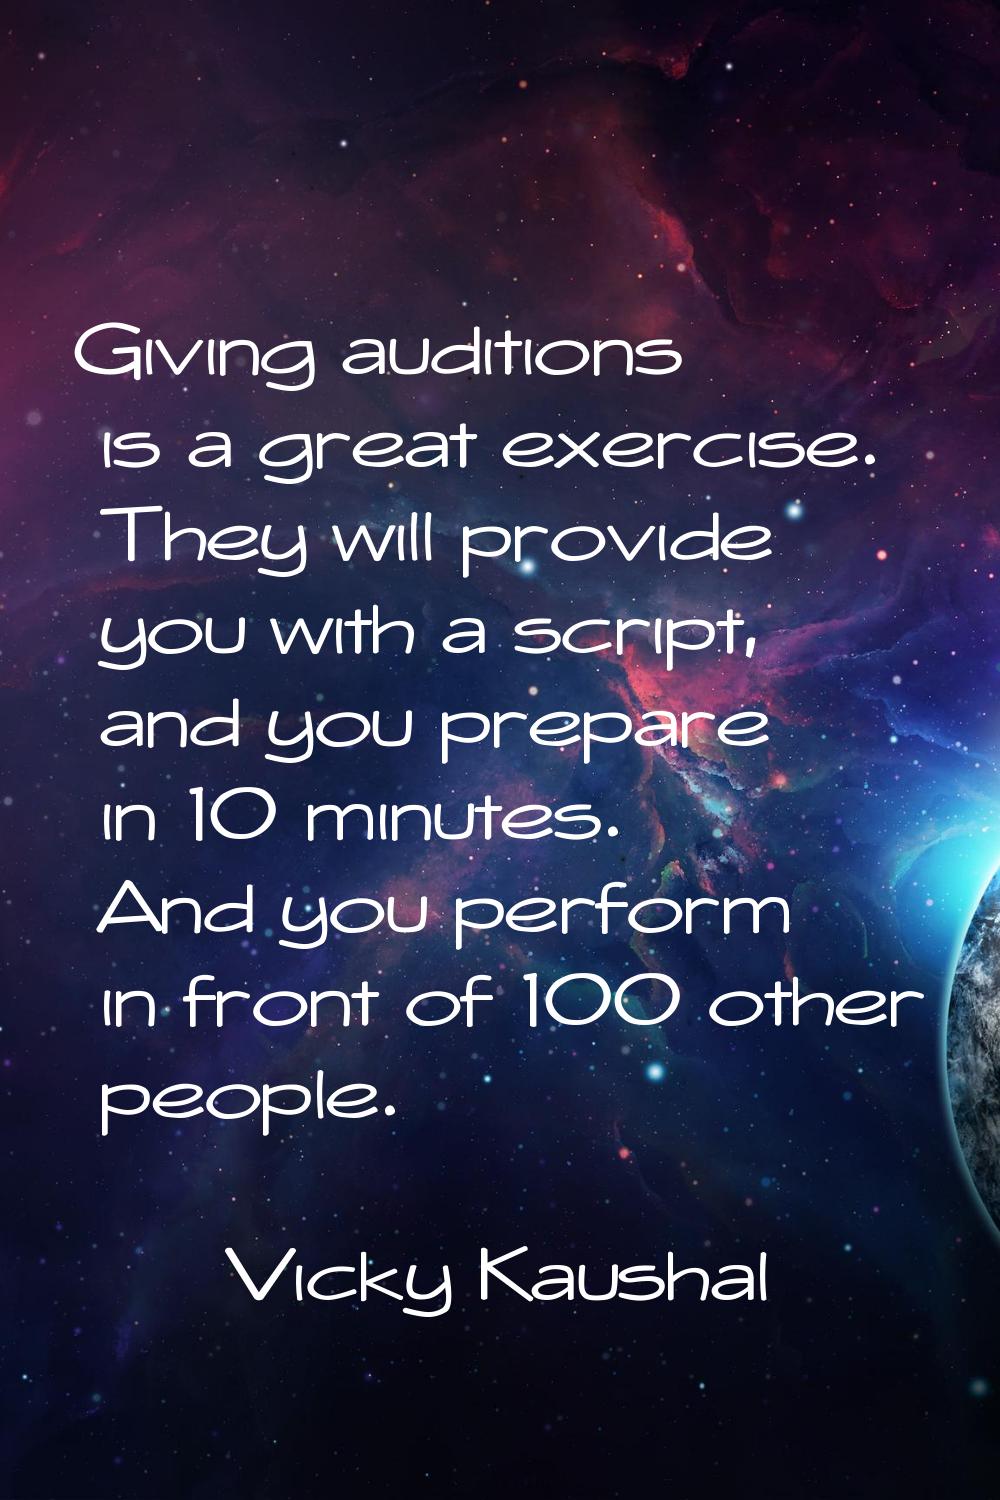 Giving auditions is a great exercise. They will provide you with a script, and you prepare in 10 mi